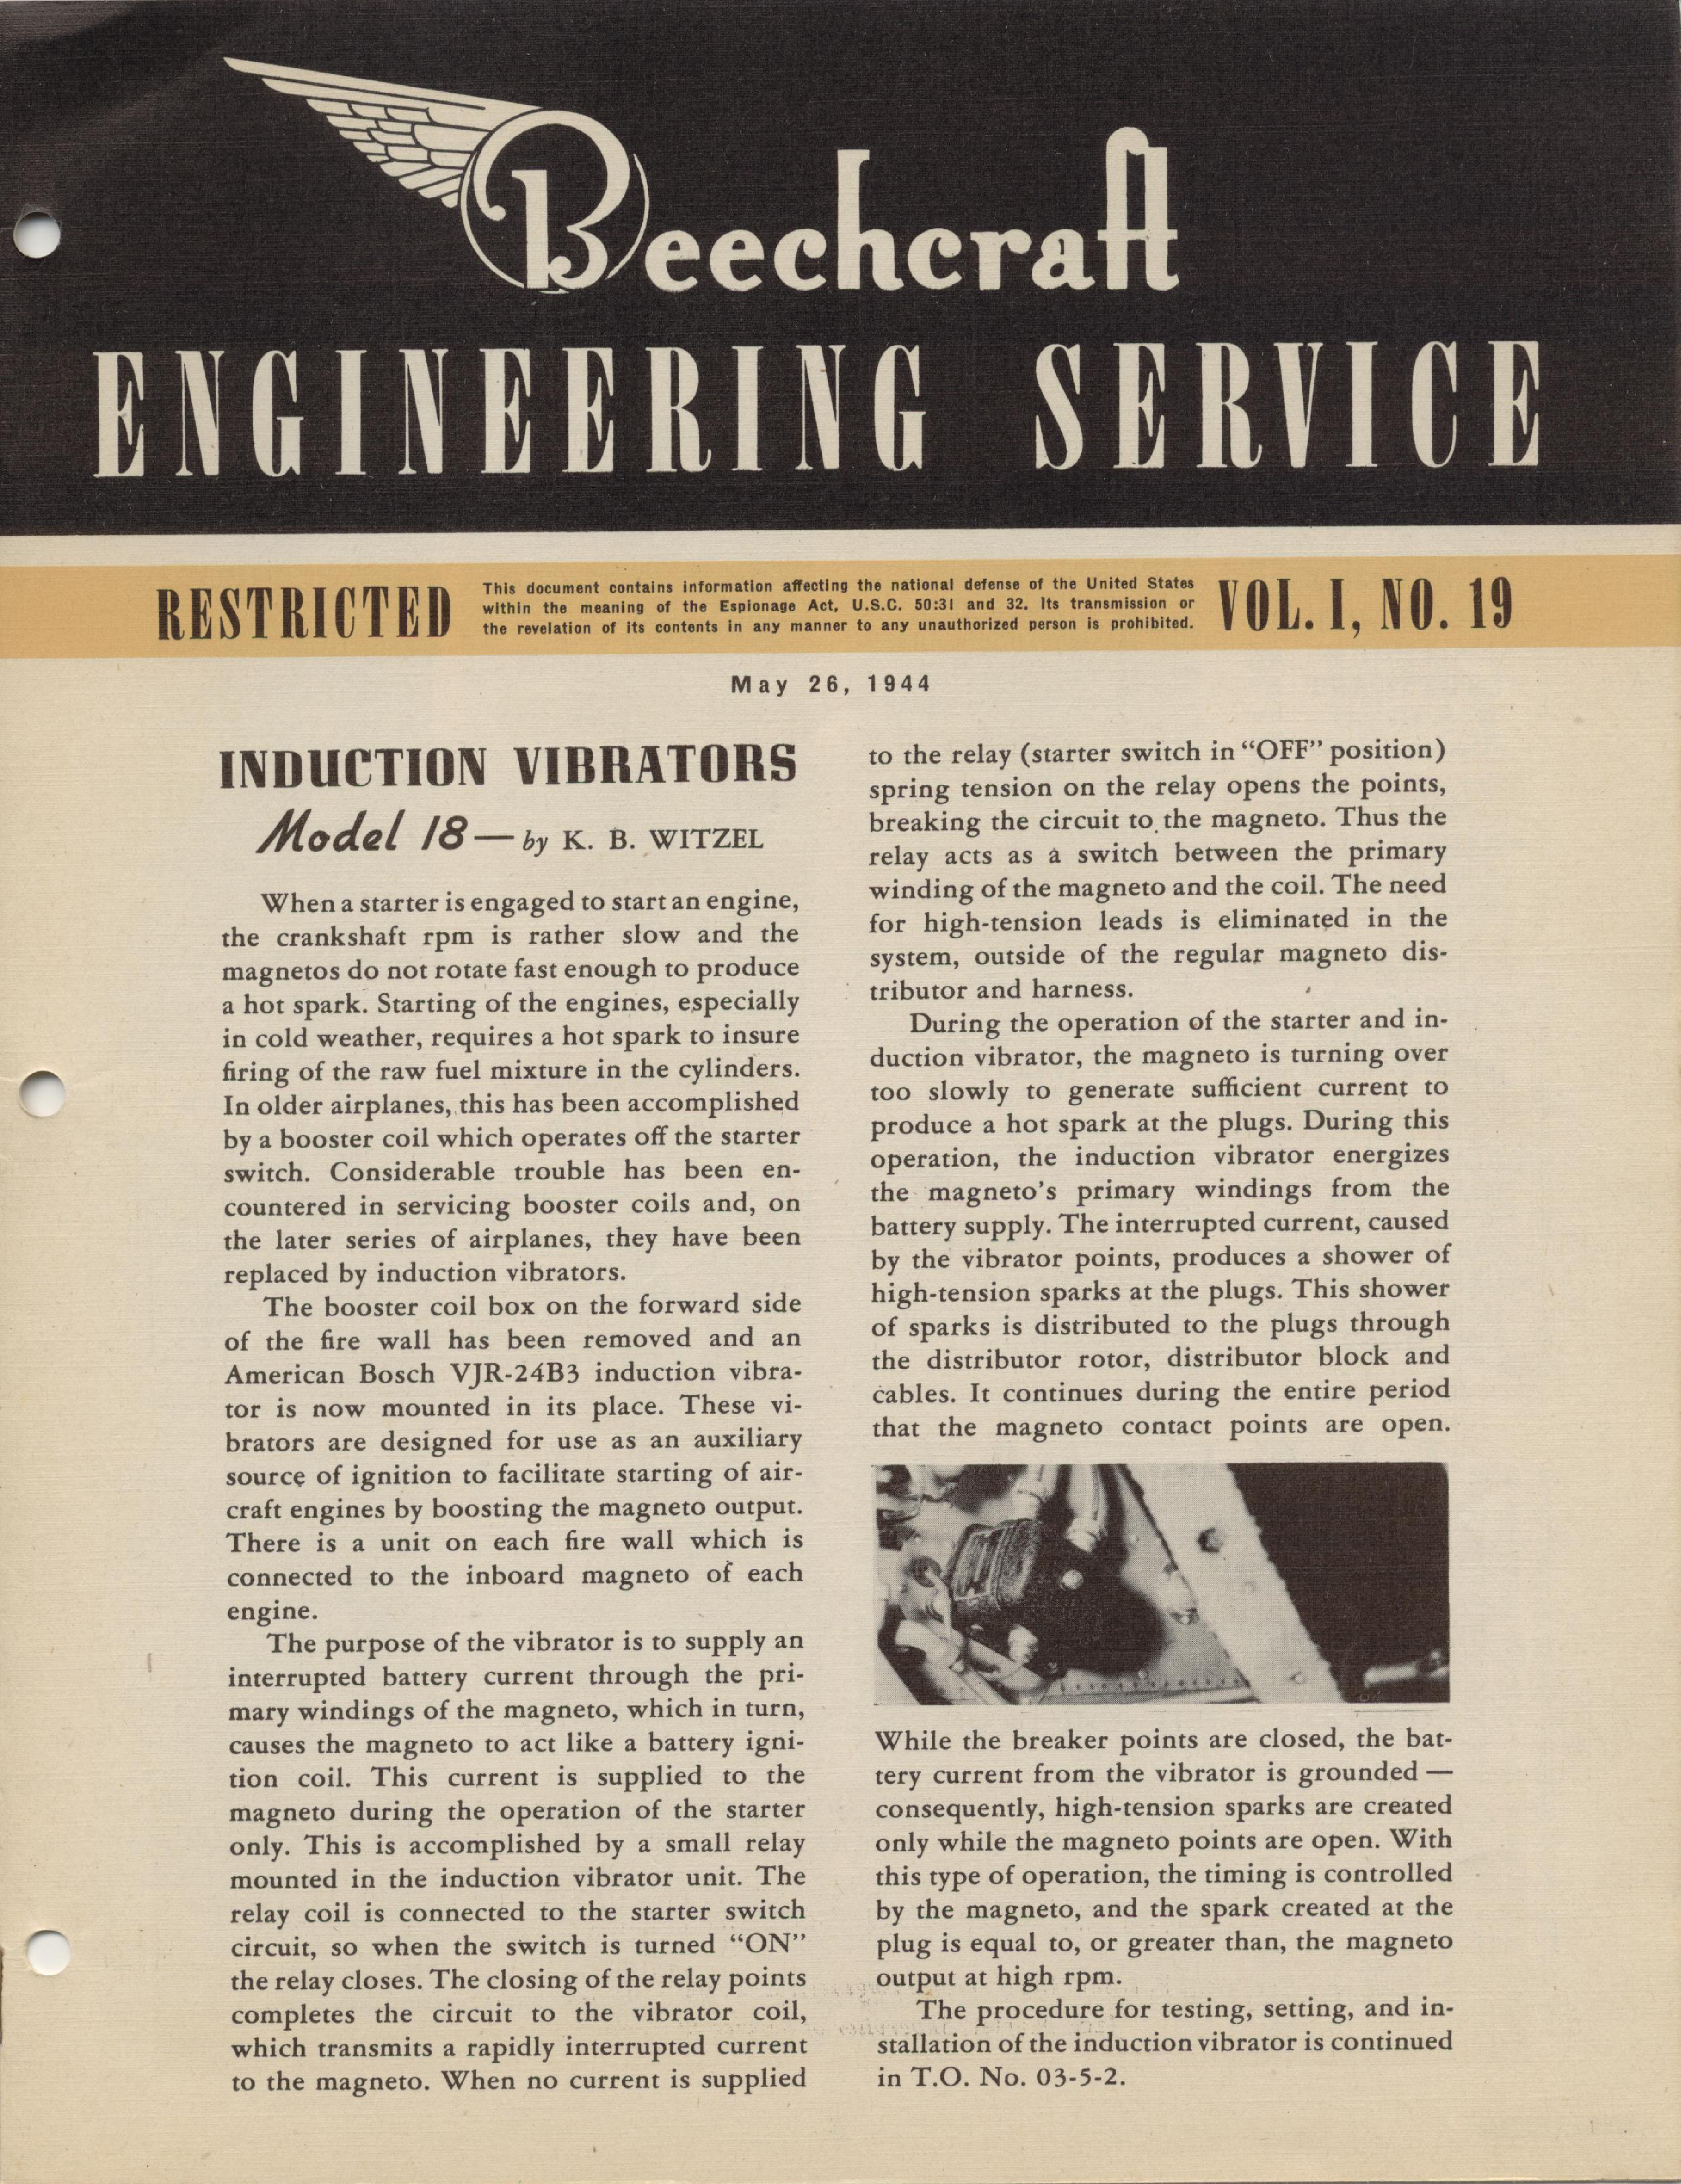 Sample page 1 from AirCorps Library document: Vol. I, No. 19 - Beechcraft Engineering Service